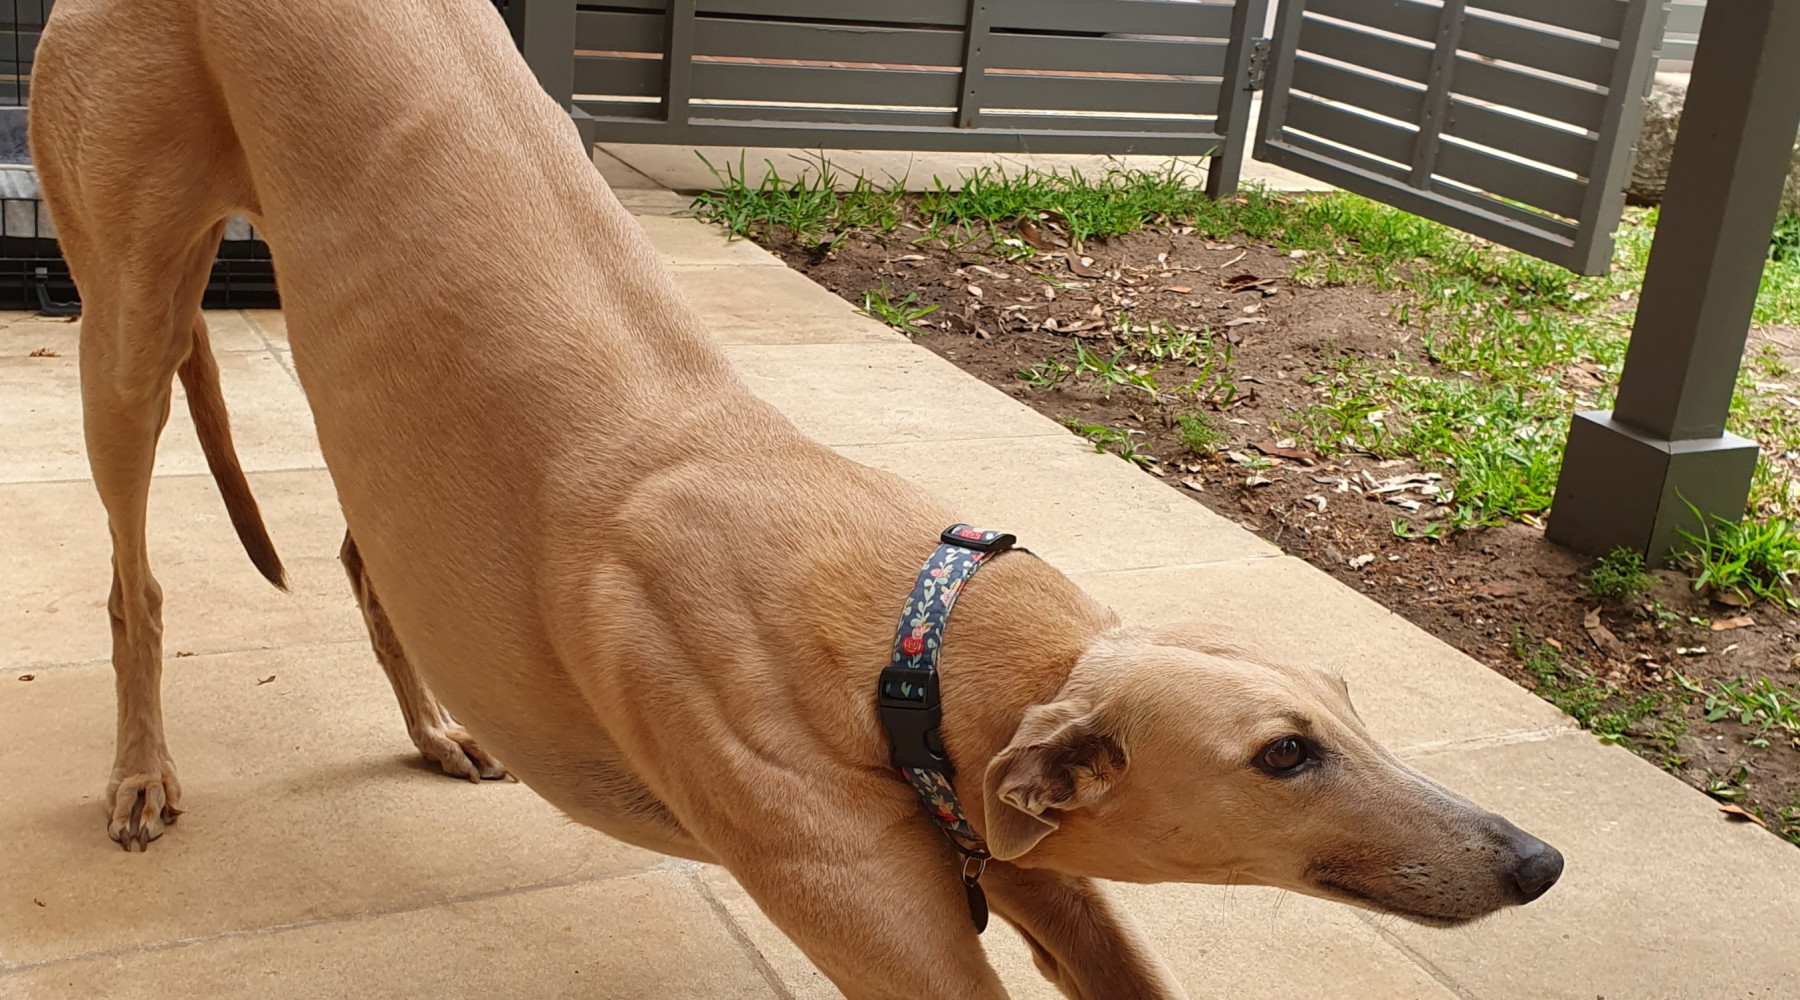 Greyhounds therapy dog called Bonnie stretching